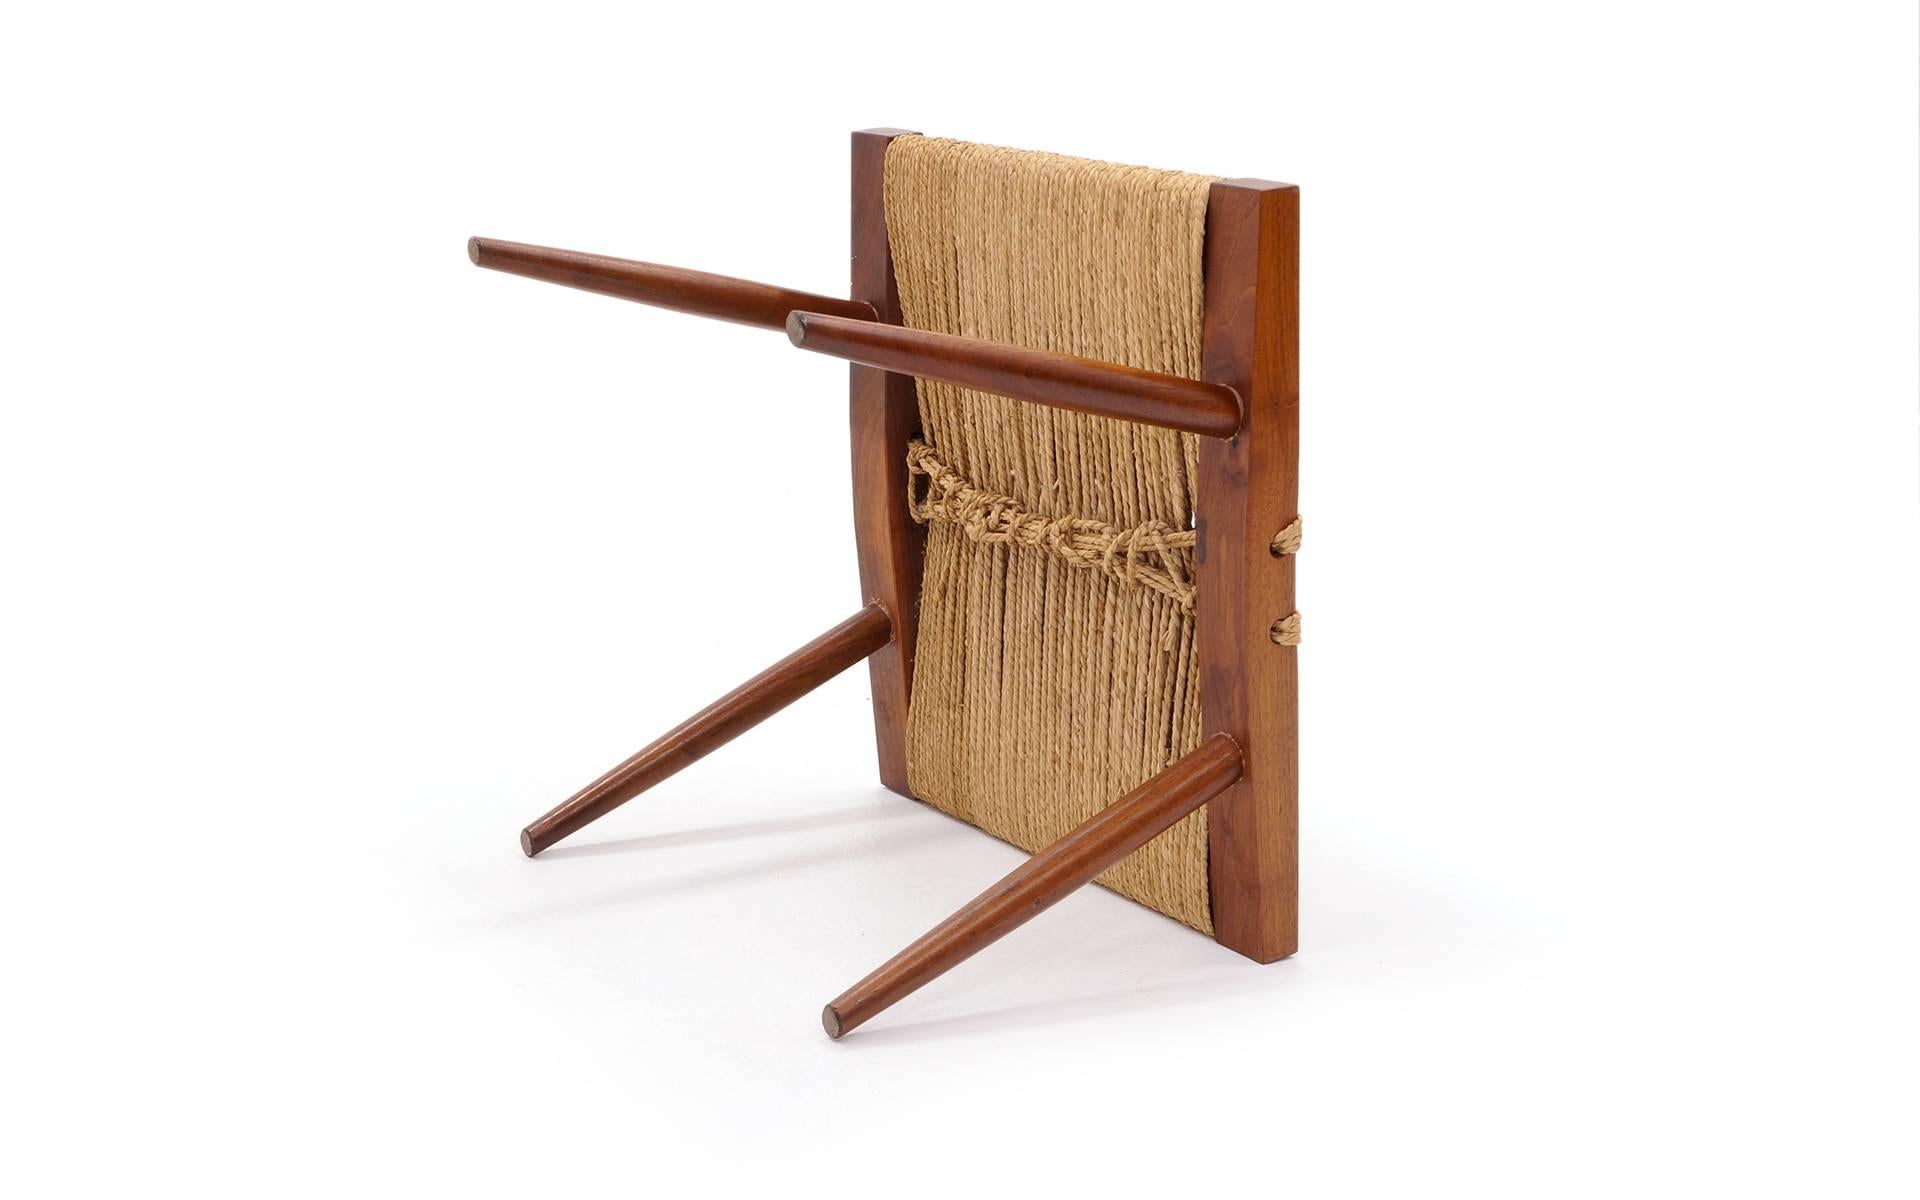 Seagrass Stunning Matched Pair of George Nakashima Walnut and Grass Rope Stools, 1964.